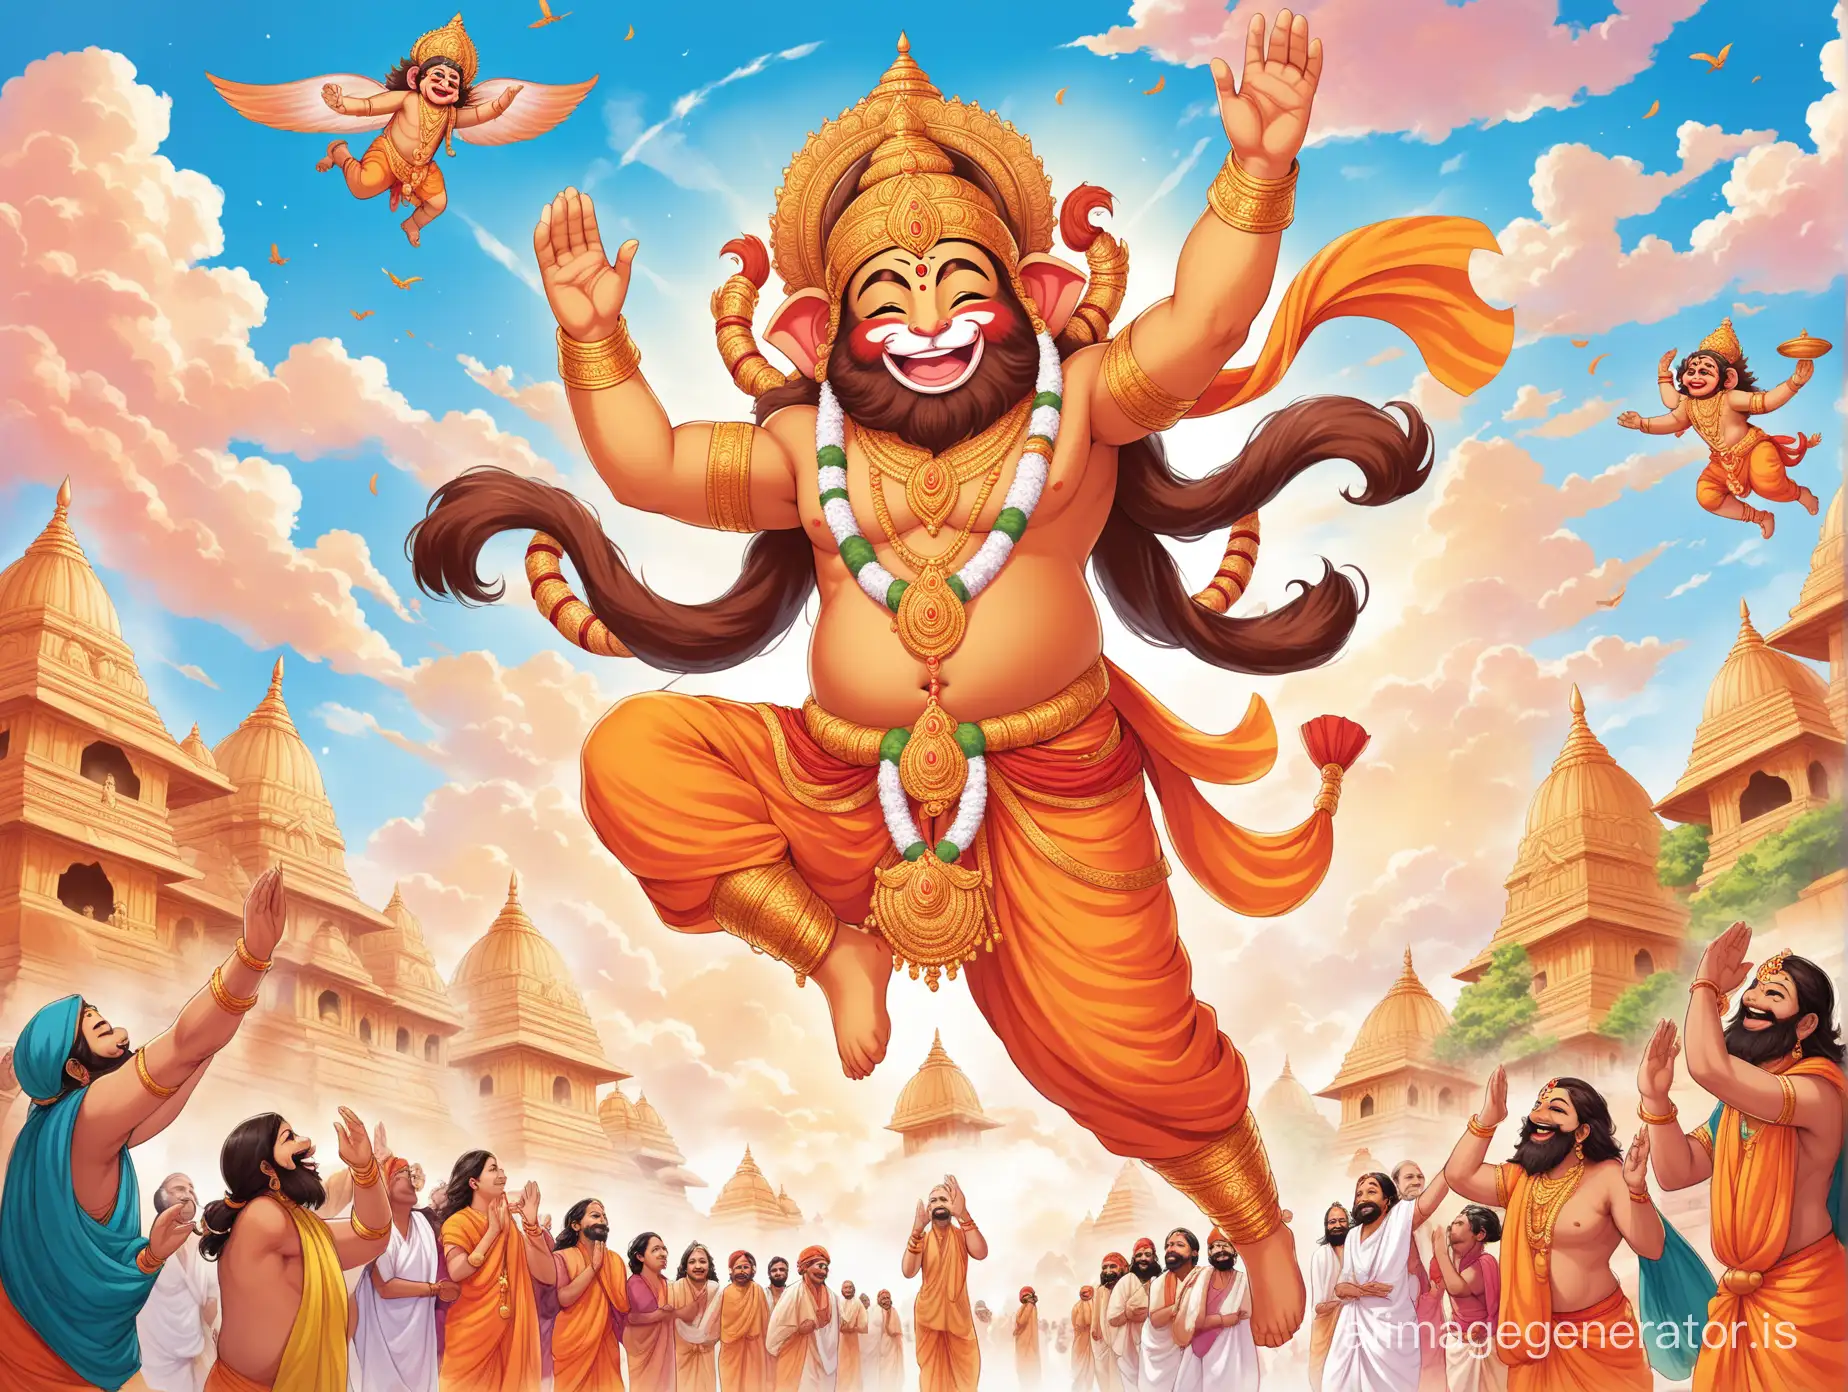 "Capture Hanumanji's playful side as he transforms into a giant and flies through the skies, spreading joy and laughter among devotees."